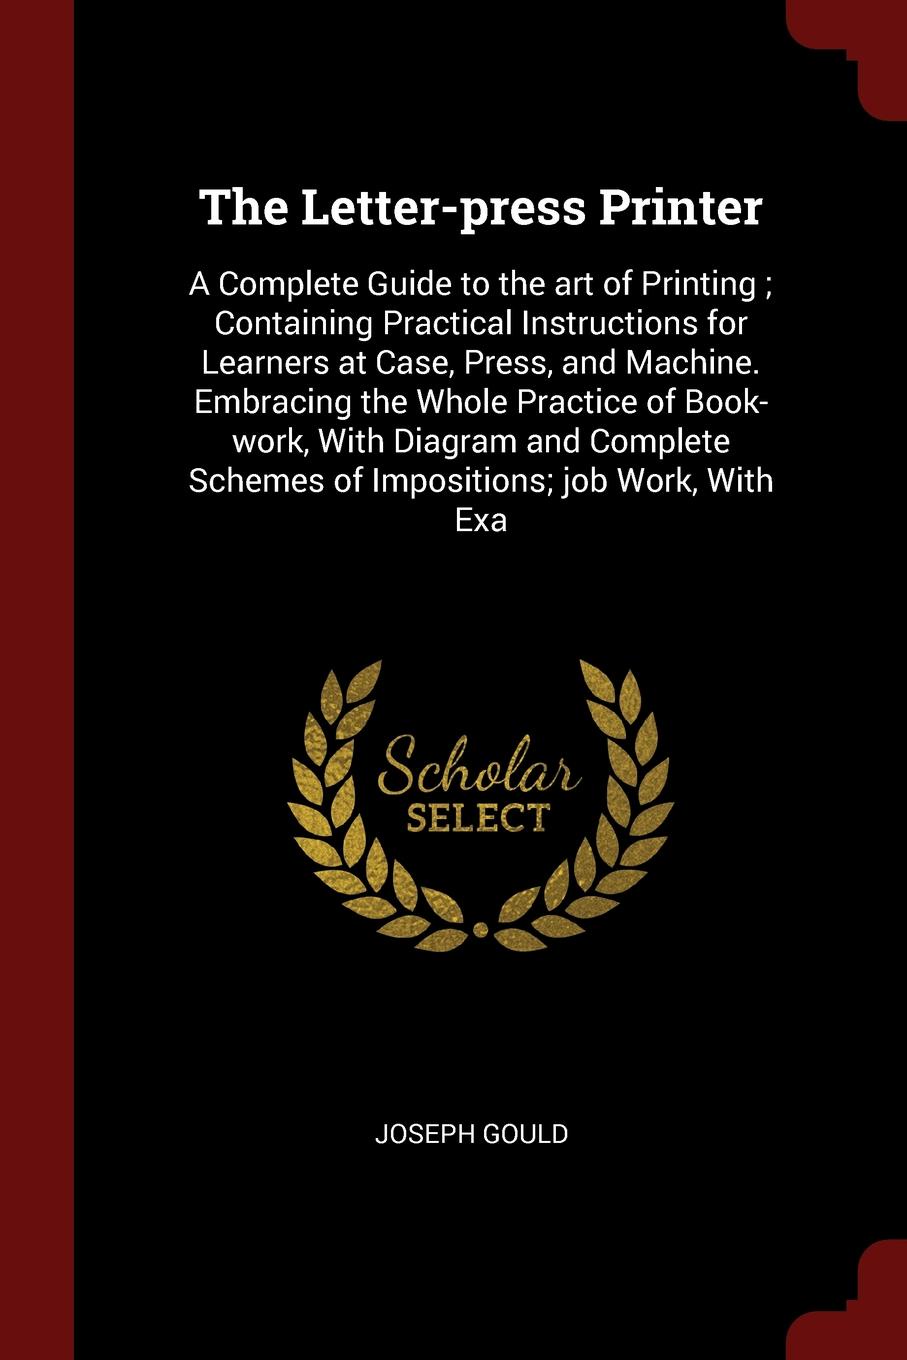 The Letter-press Printer. A Complete Guide to the art of Printing ; Containing Practical Instructions for Learners at Case, Press, and Machine. Embracing the Whole Practice of Book-work, With Diagram and Complete Schemes of Impositions; job Work, ...